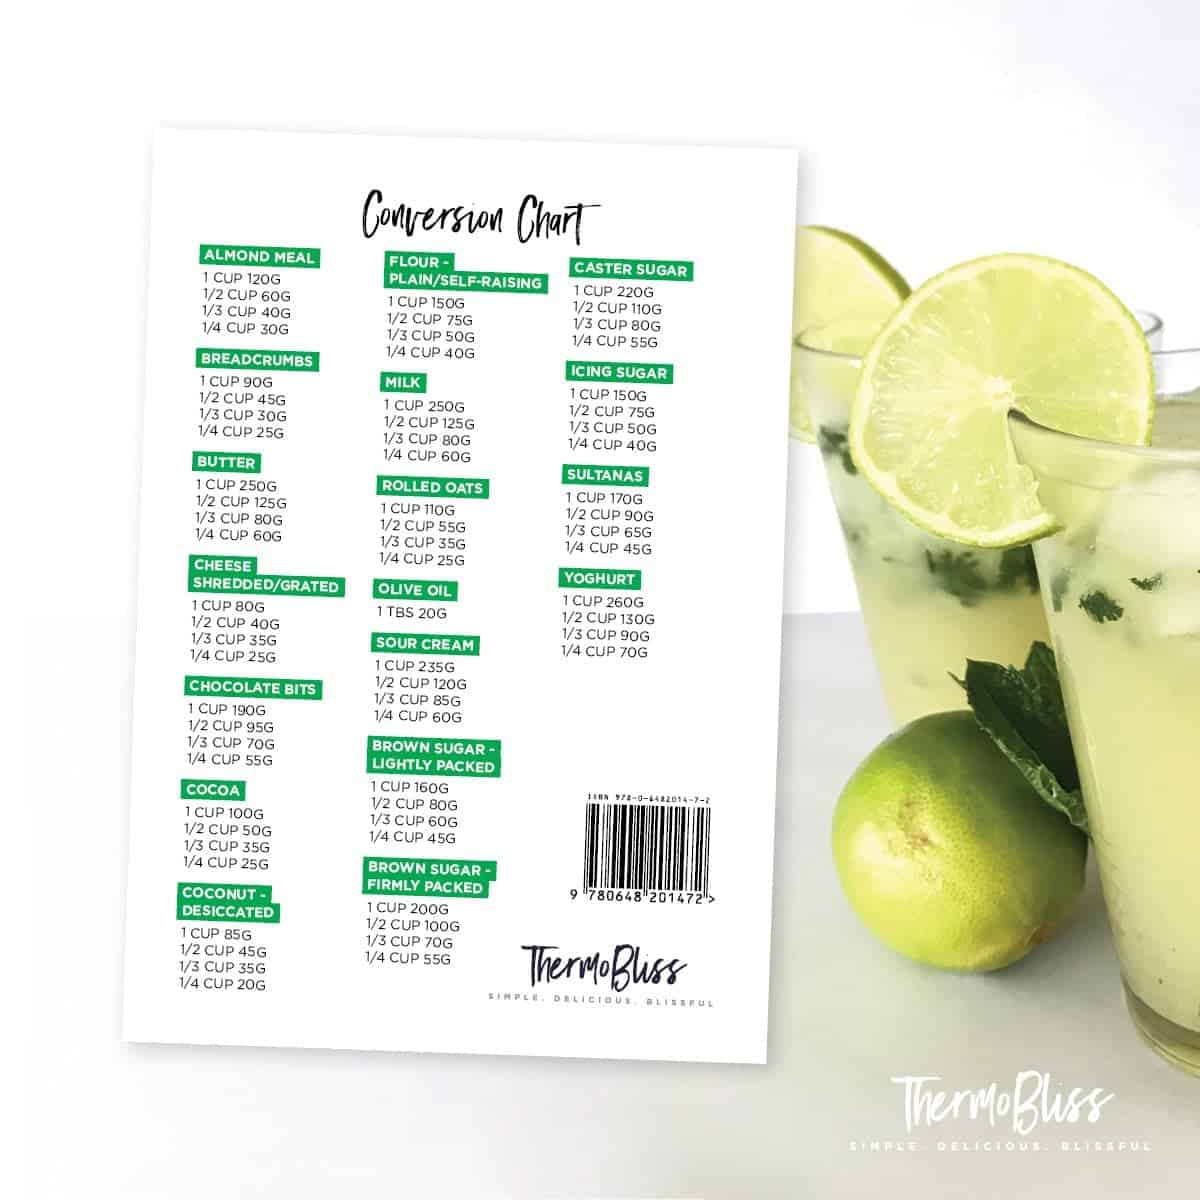 Image of the back cover showing the conversion chart from ThermoBliss Cocktails cookbook volume 1.